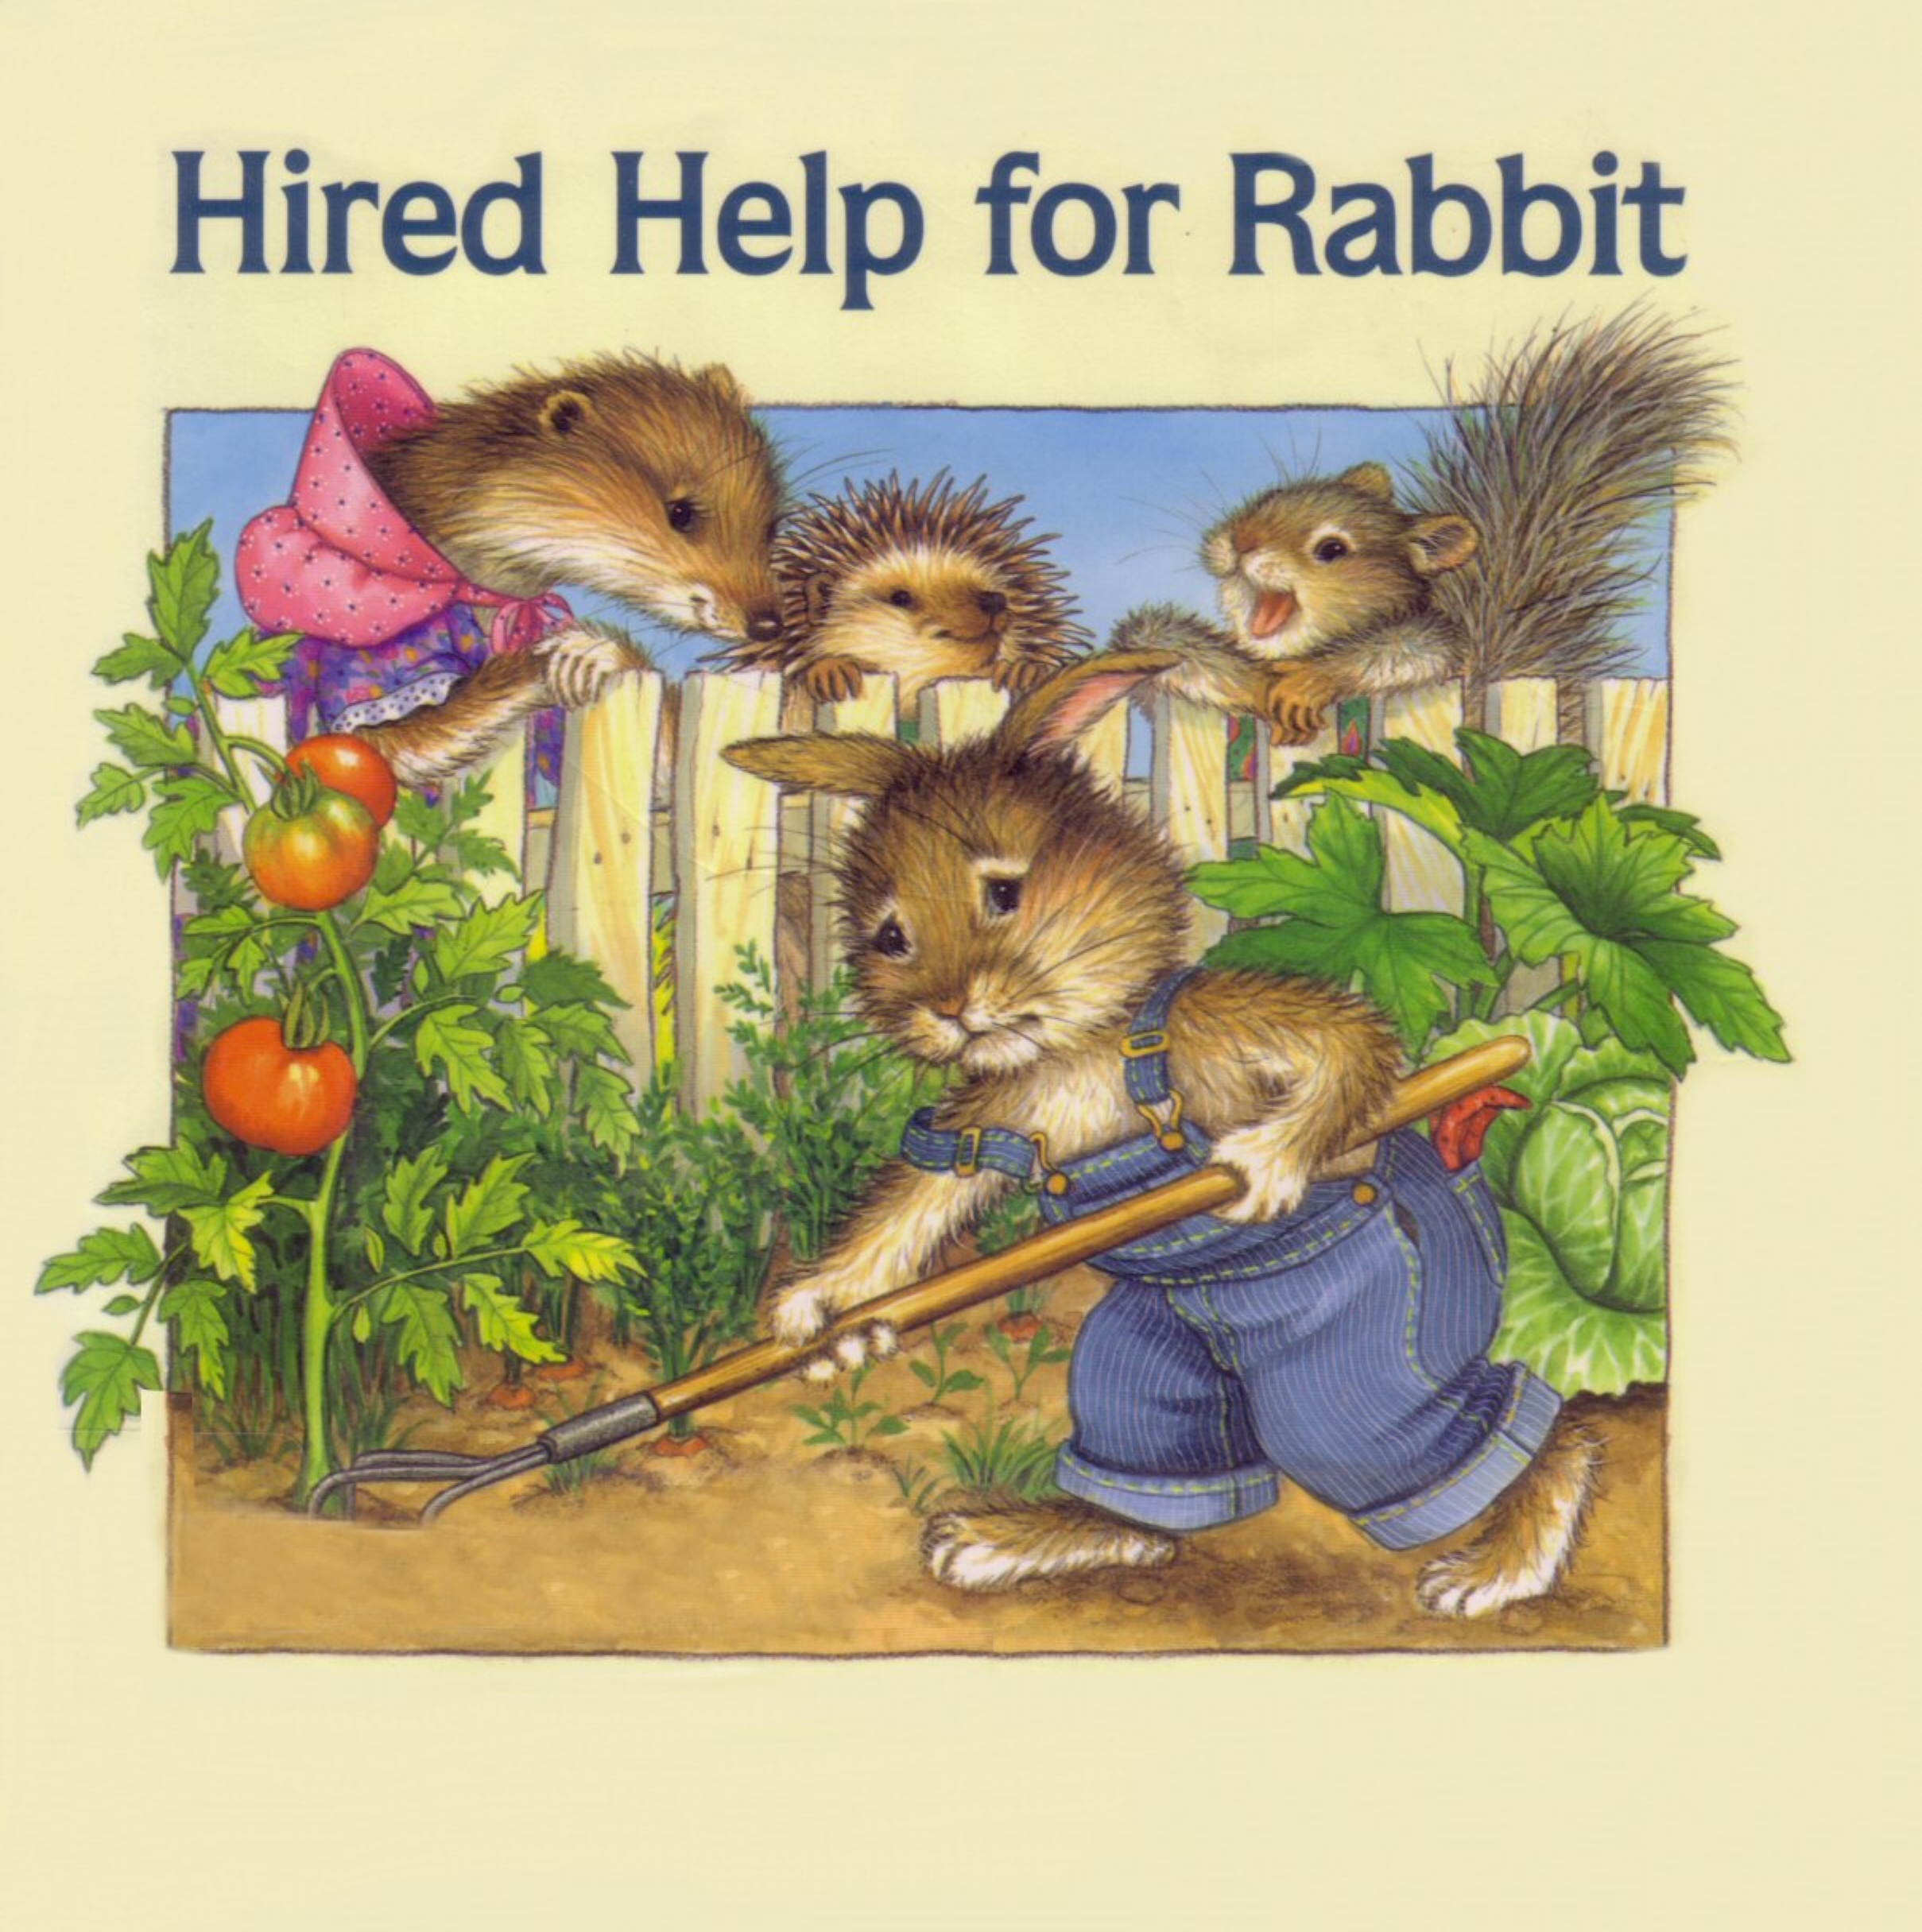 Hired Help for Rabbit